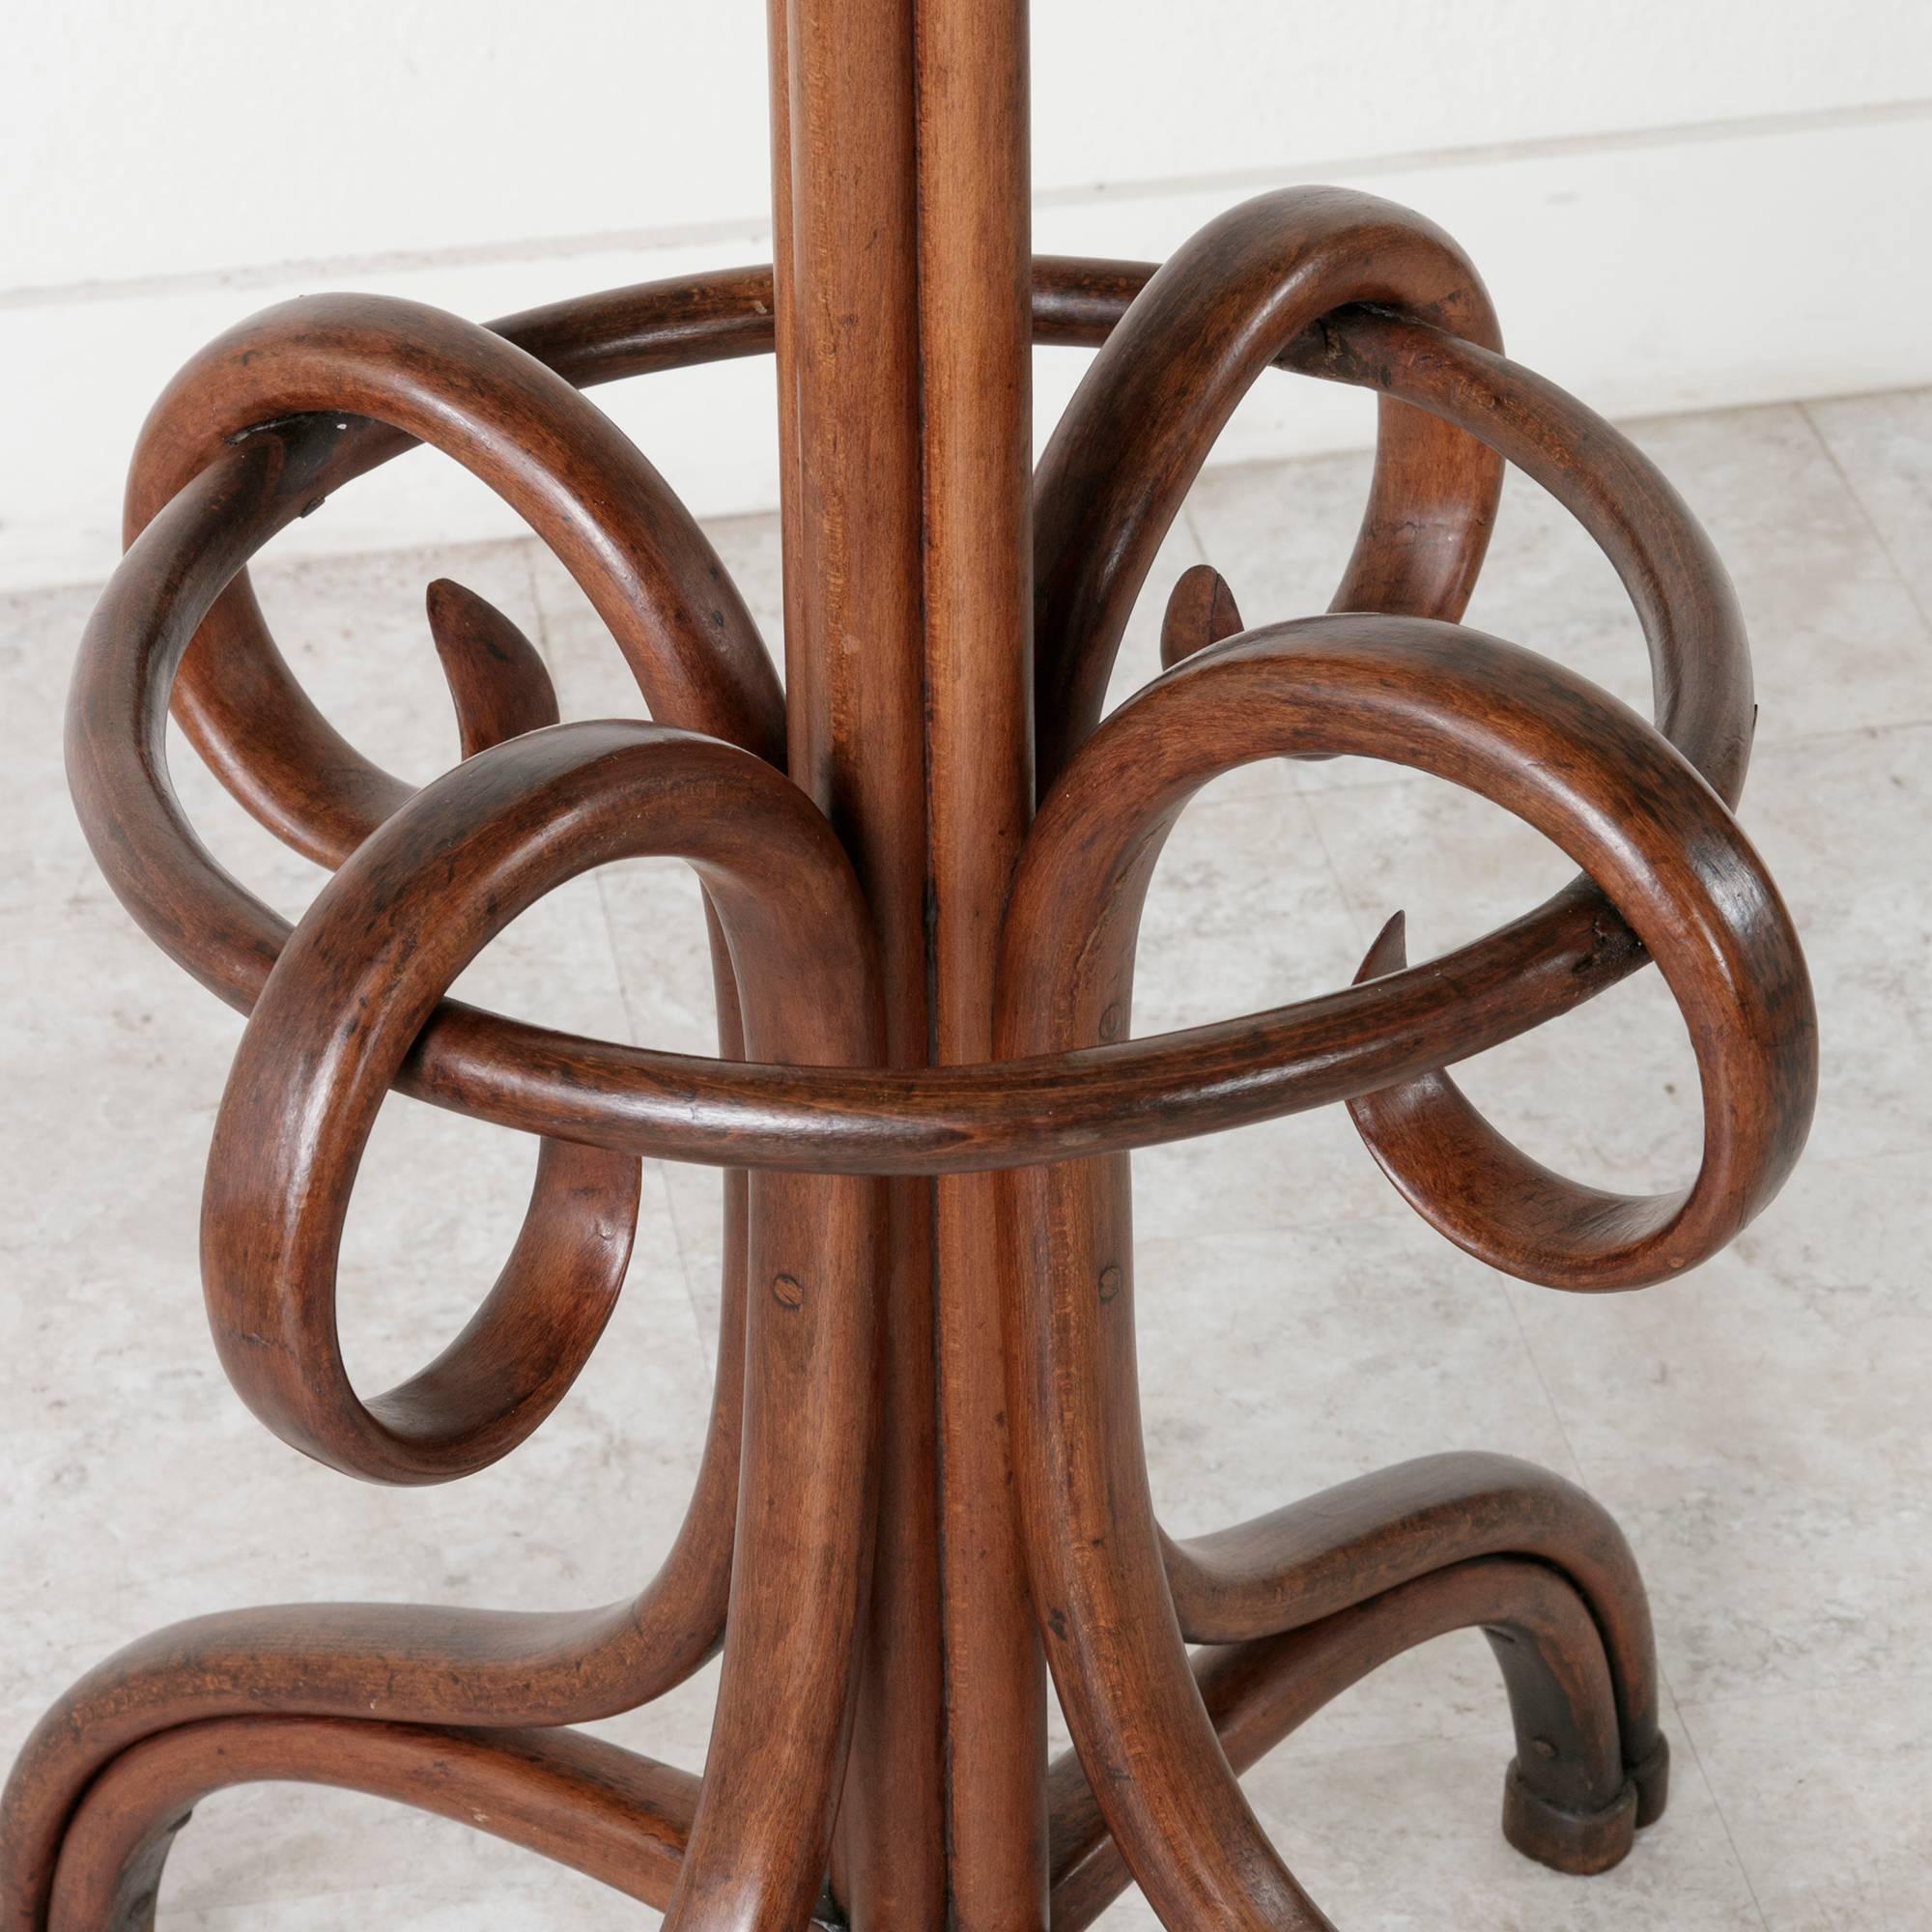 This Classic Thonet style hat and coat rack is made of richly finished bent beechwood. A familiar fixture in the early 20th century French bistro, this piece will bring a handsome touch to any entry or dressing space or to your own French café,